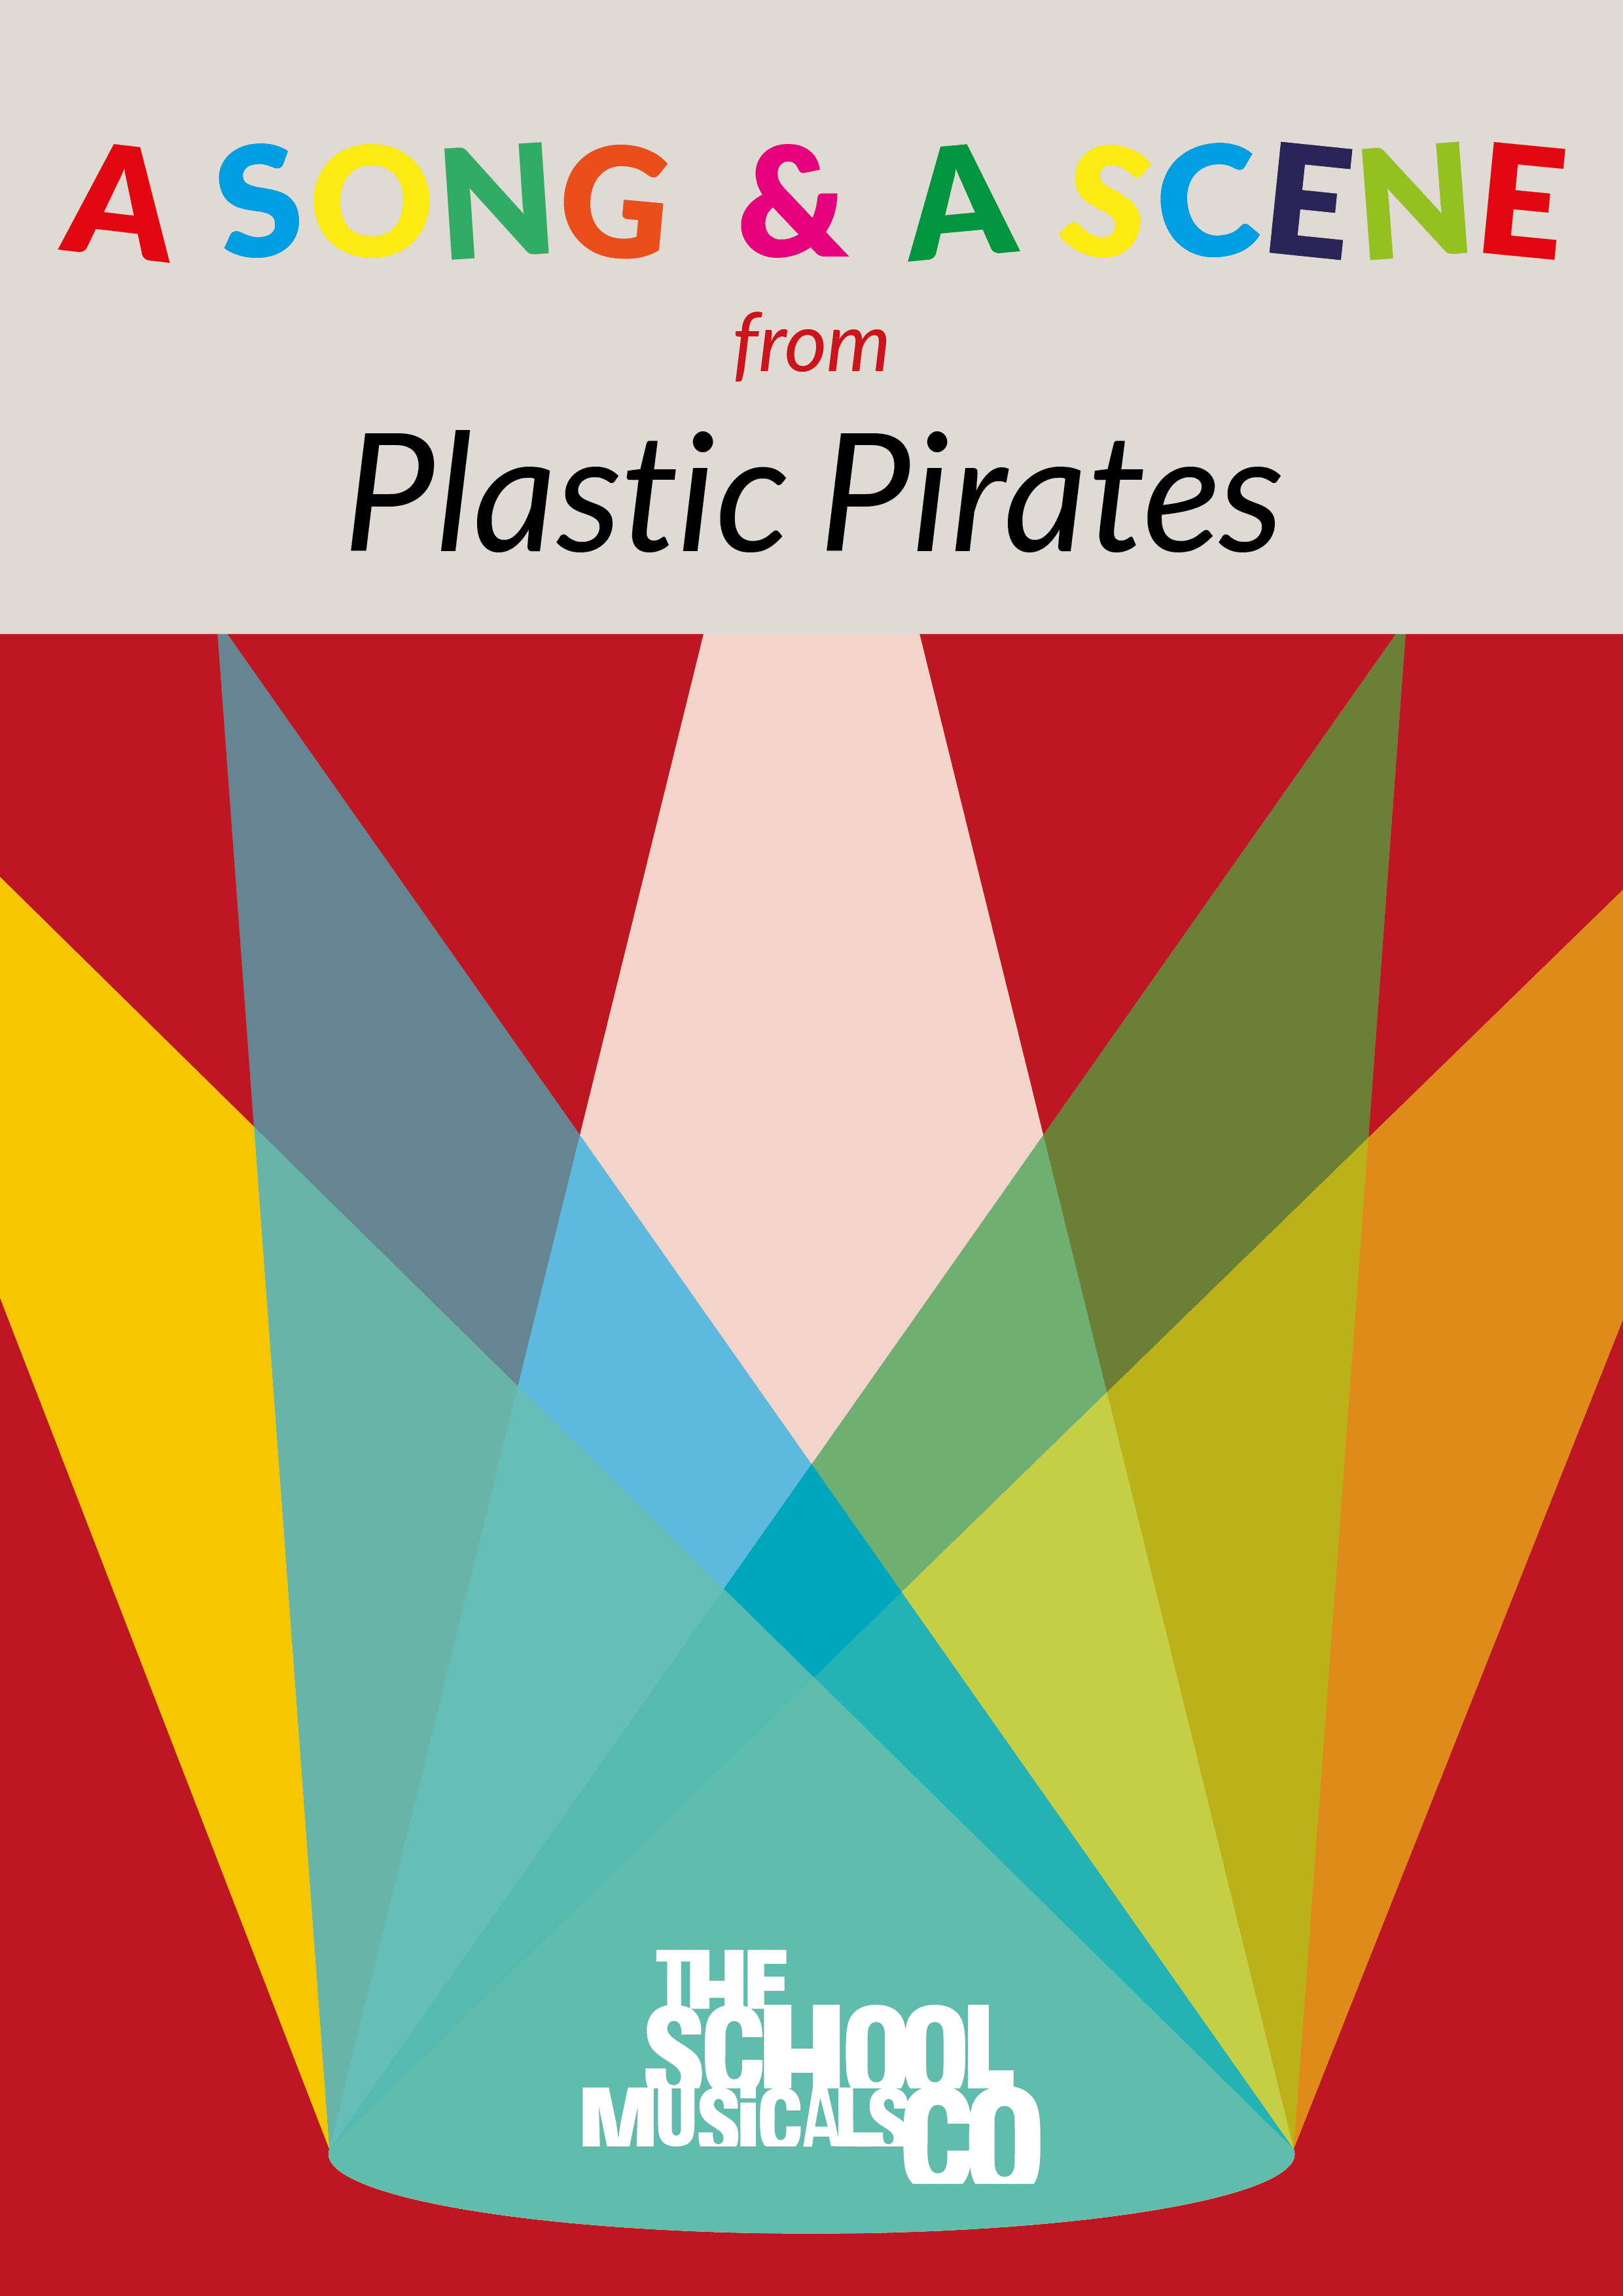 A Song & A Scene from Plastic Pirates